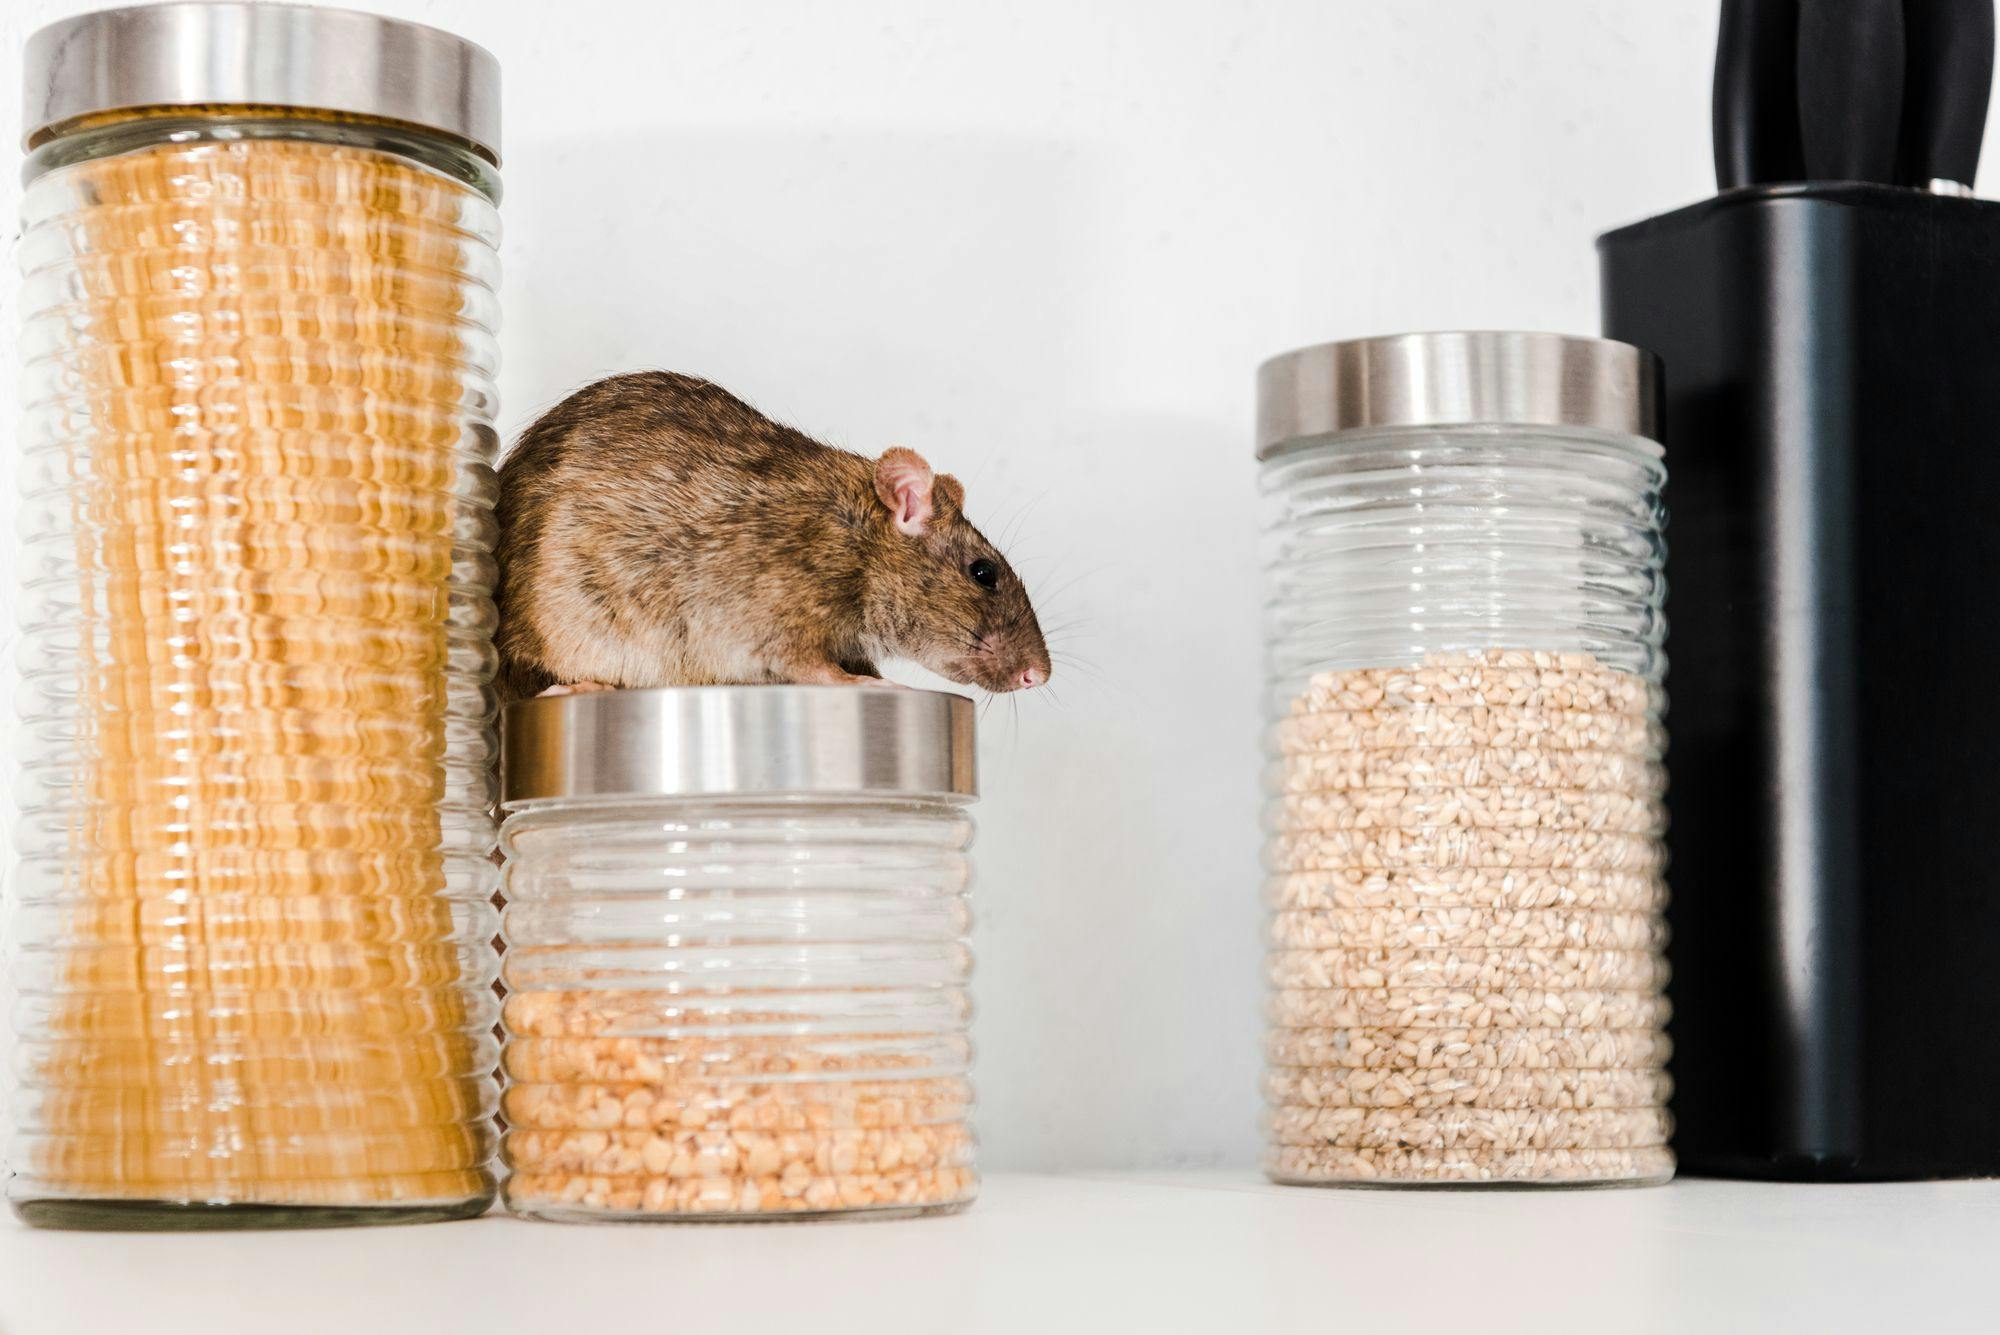 Explore the legal, ethical, and social aspects of rodent exclusion. This comprehensive guide covers humane practices, regulations, and why ethics matter in pest control.